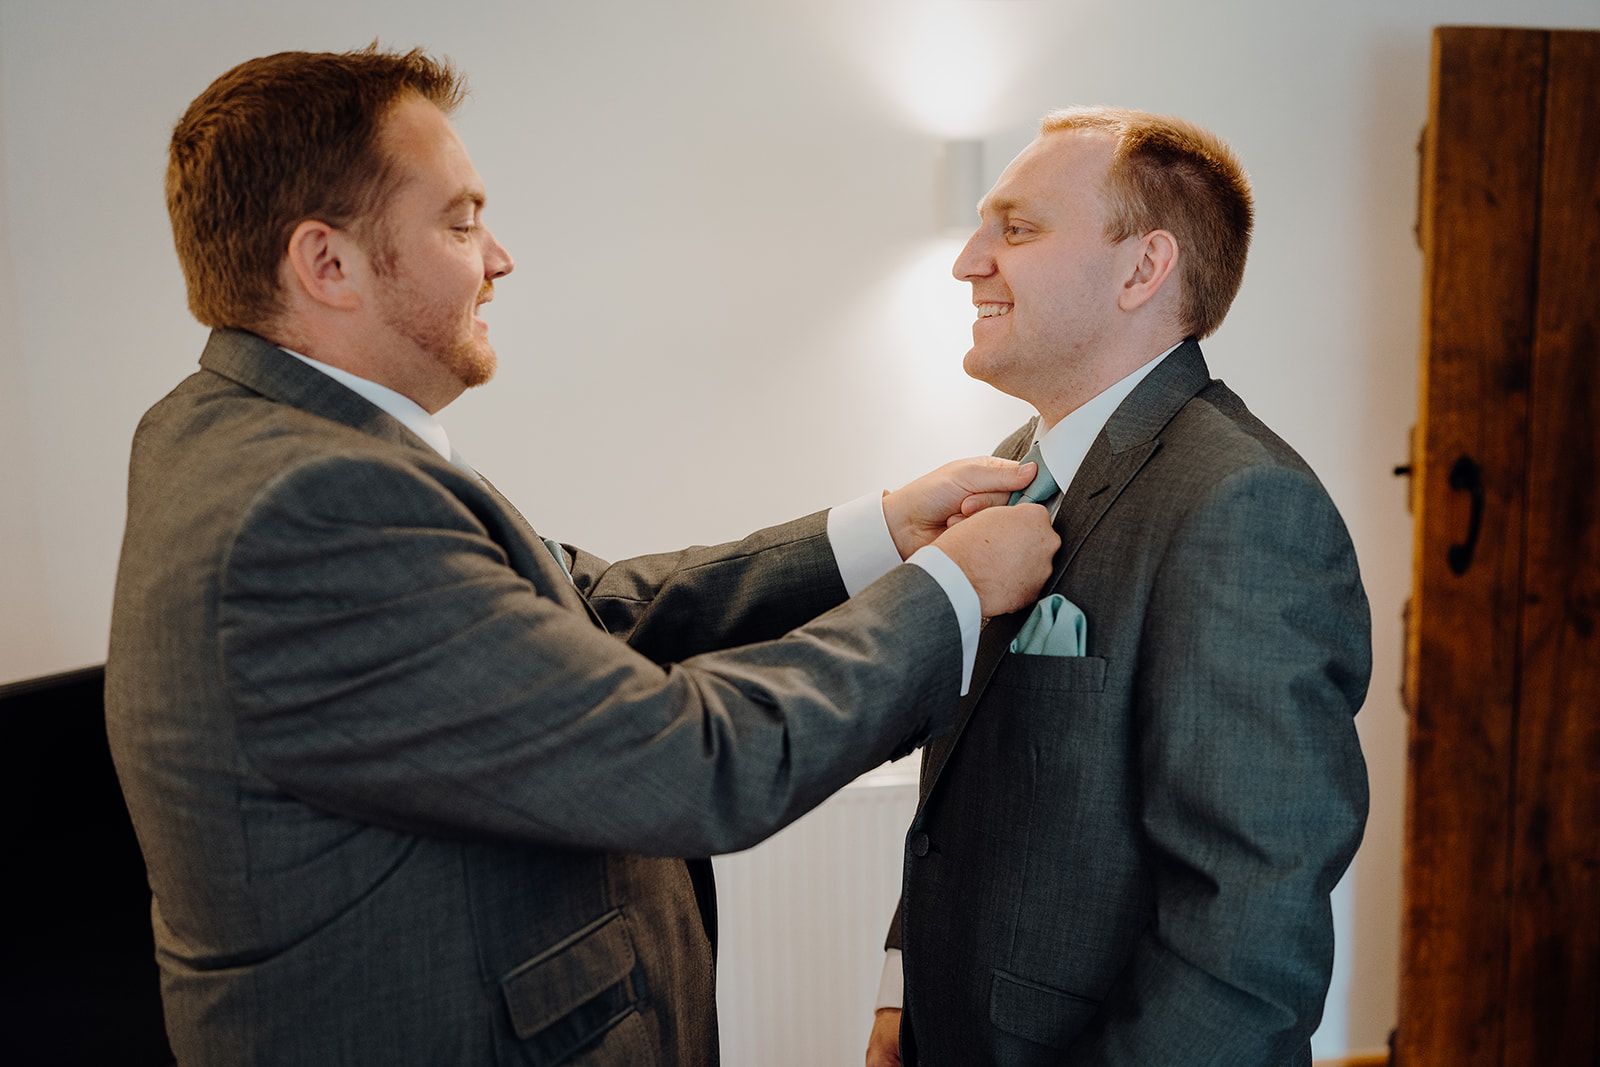 James having his tie adjusted by his best man on the morning of his wedding at Huntsmill Farm. Photo thanks to Sam and Steve Photography.